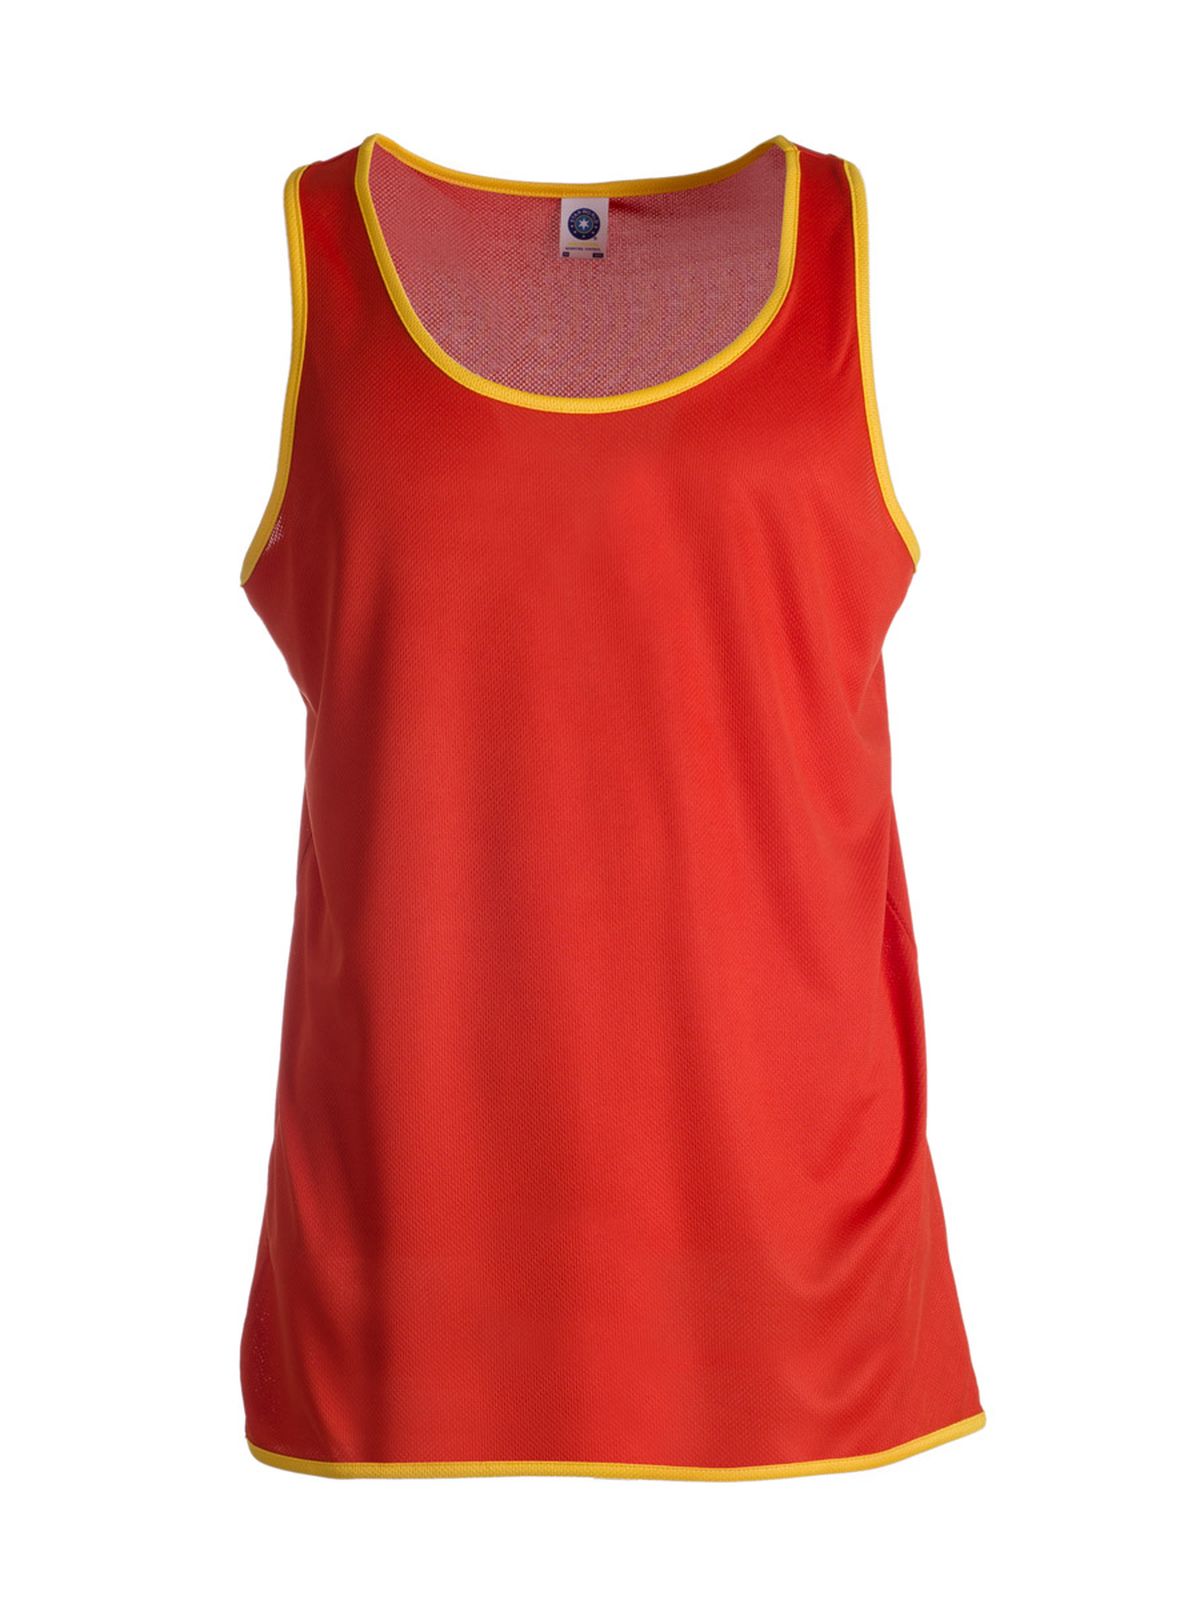 ultra-tech-contrast-running-and-sports-vest-fiesta-red-gold.webp